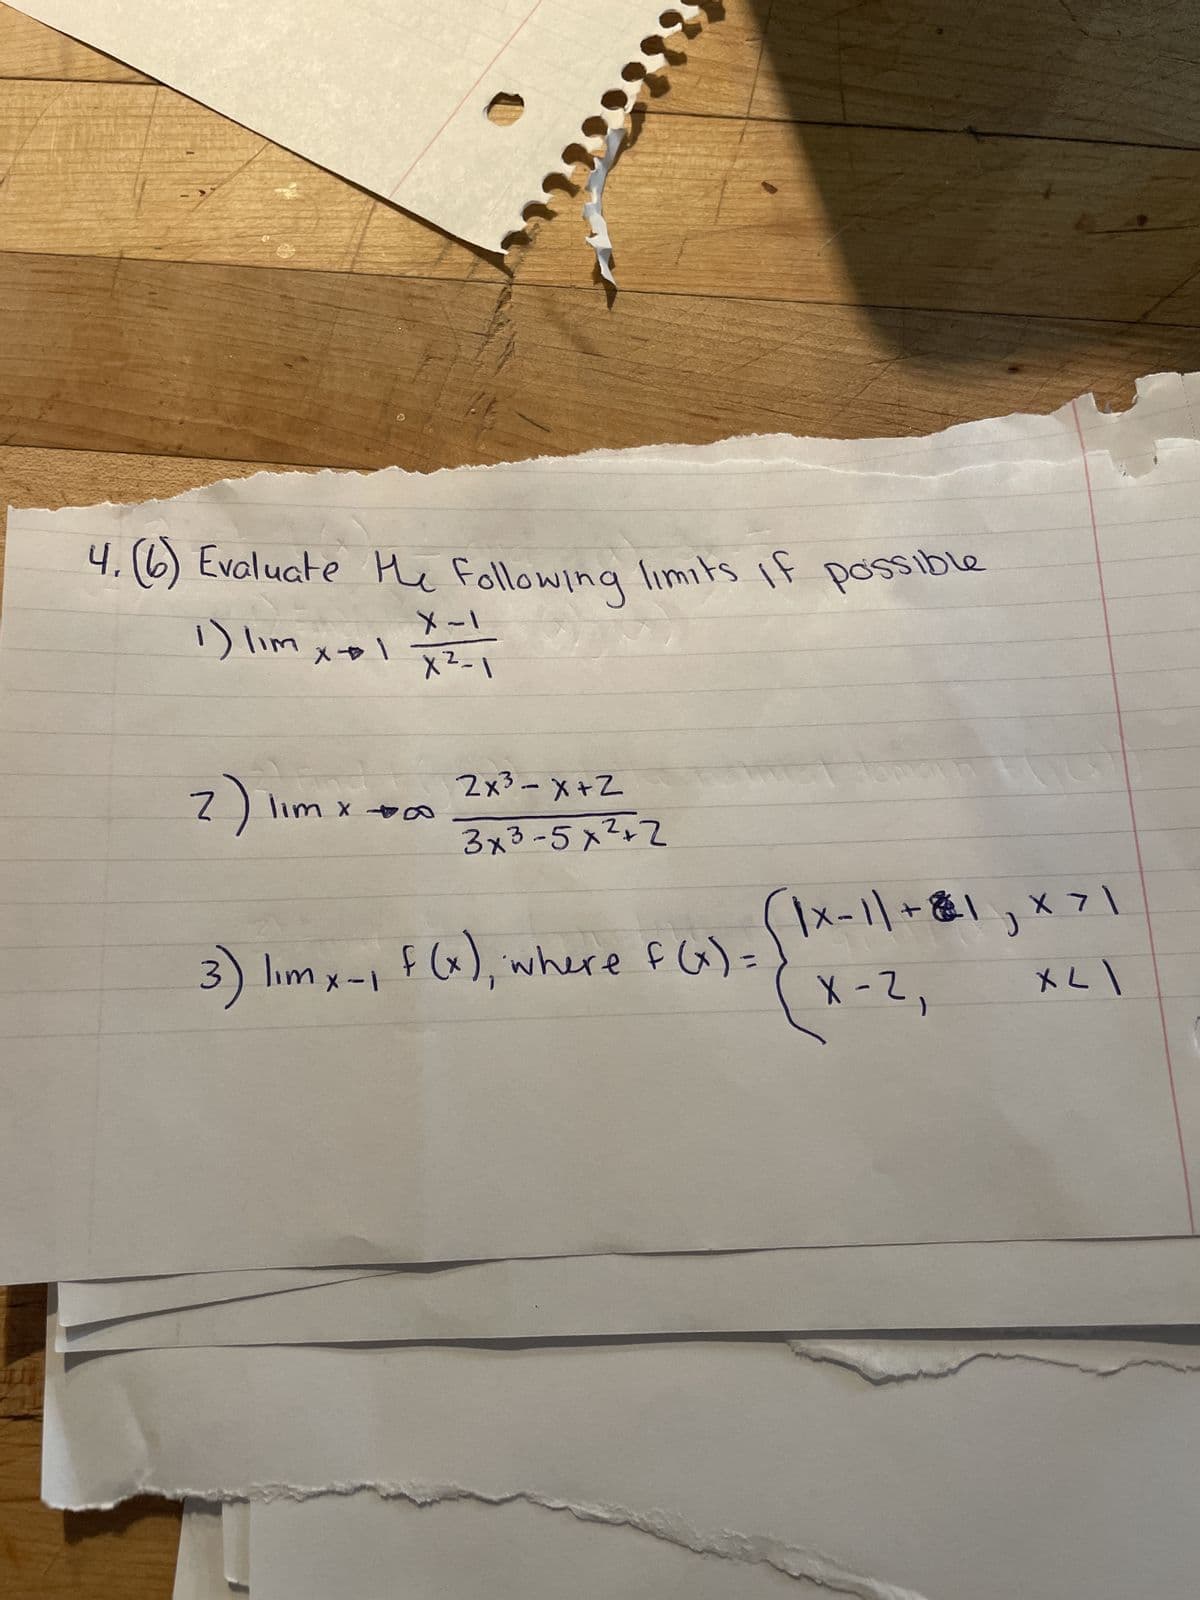 4. (6) Evaluate the following limits if possible
1) lim x + 1
X-1
X²-1
will (2
lim x +
Z+X - SXZ
3x3-5x² +2
3) limx-₁ F(x), where f(x)=
|x-1| + 1
J X 71
X-2,
צר\